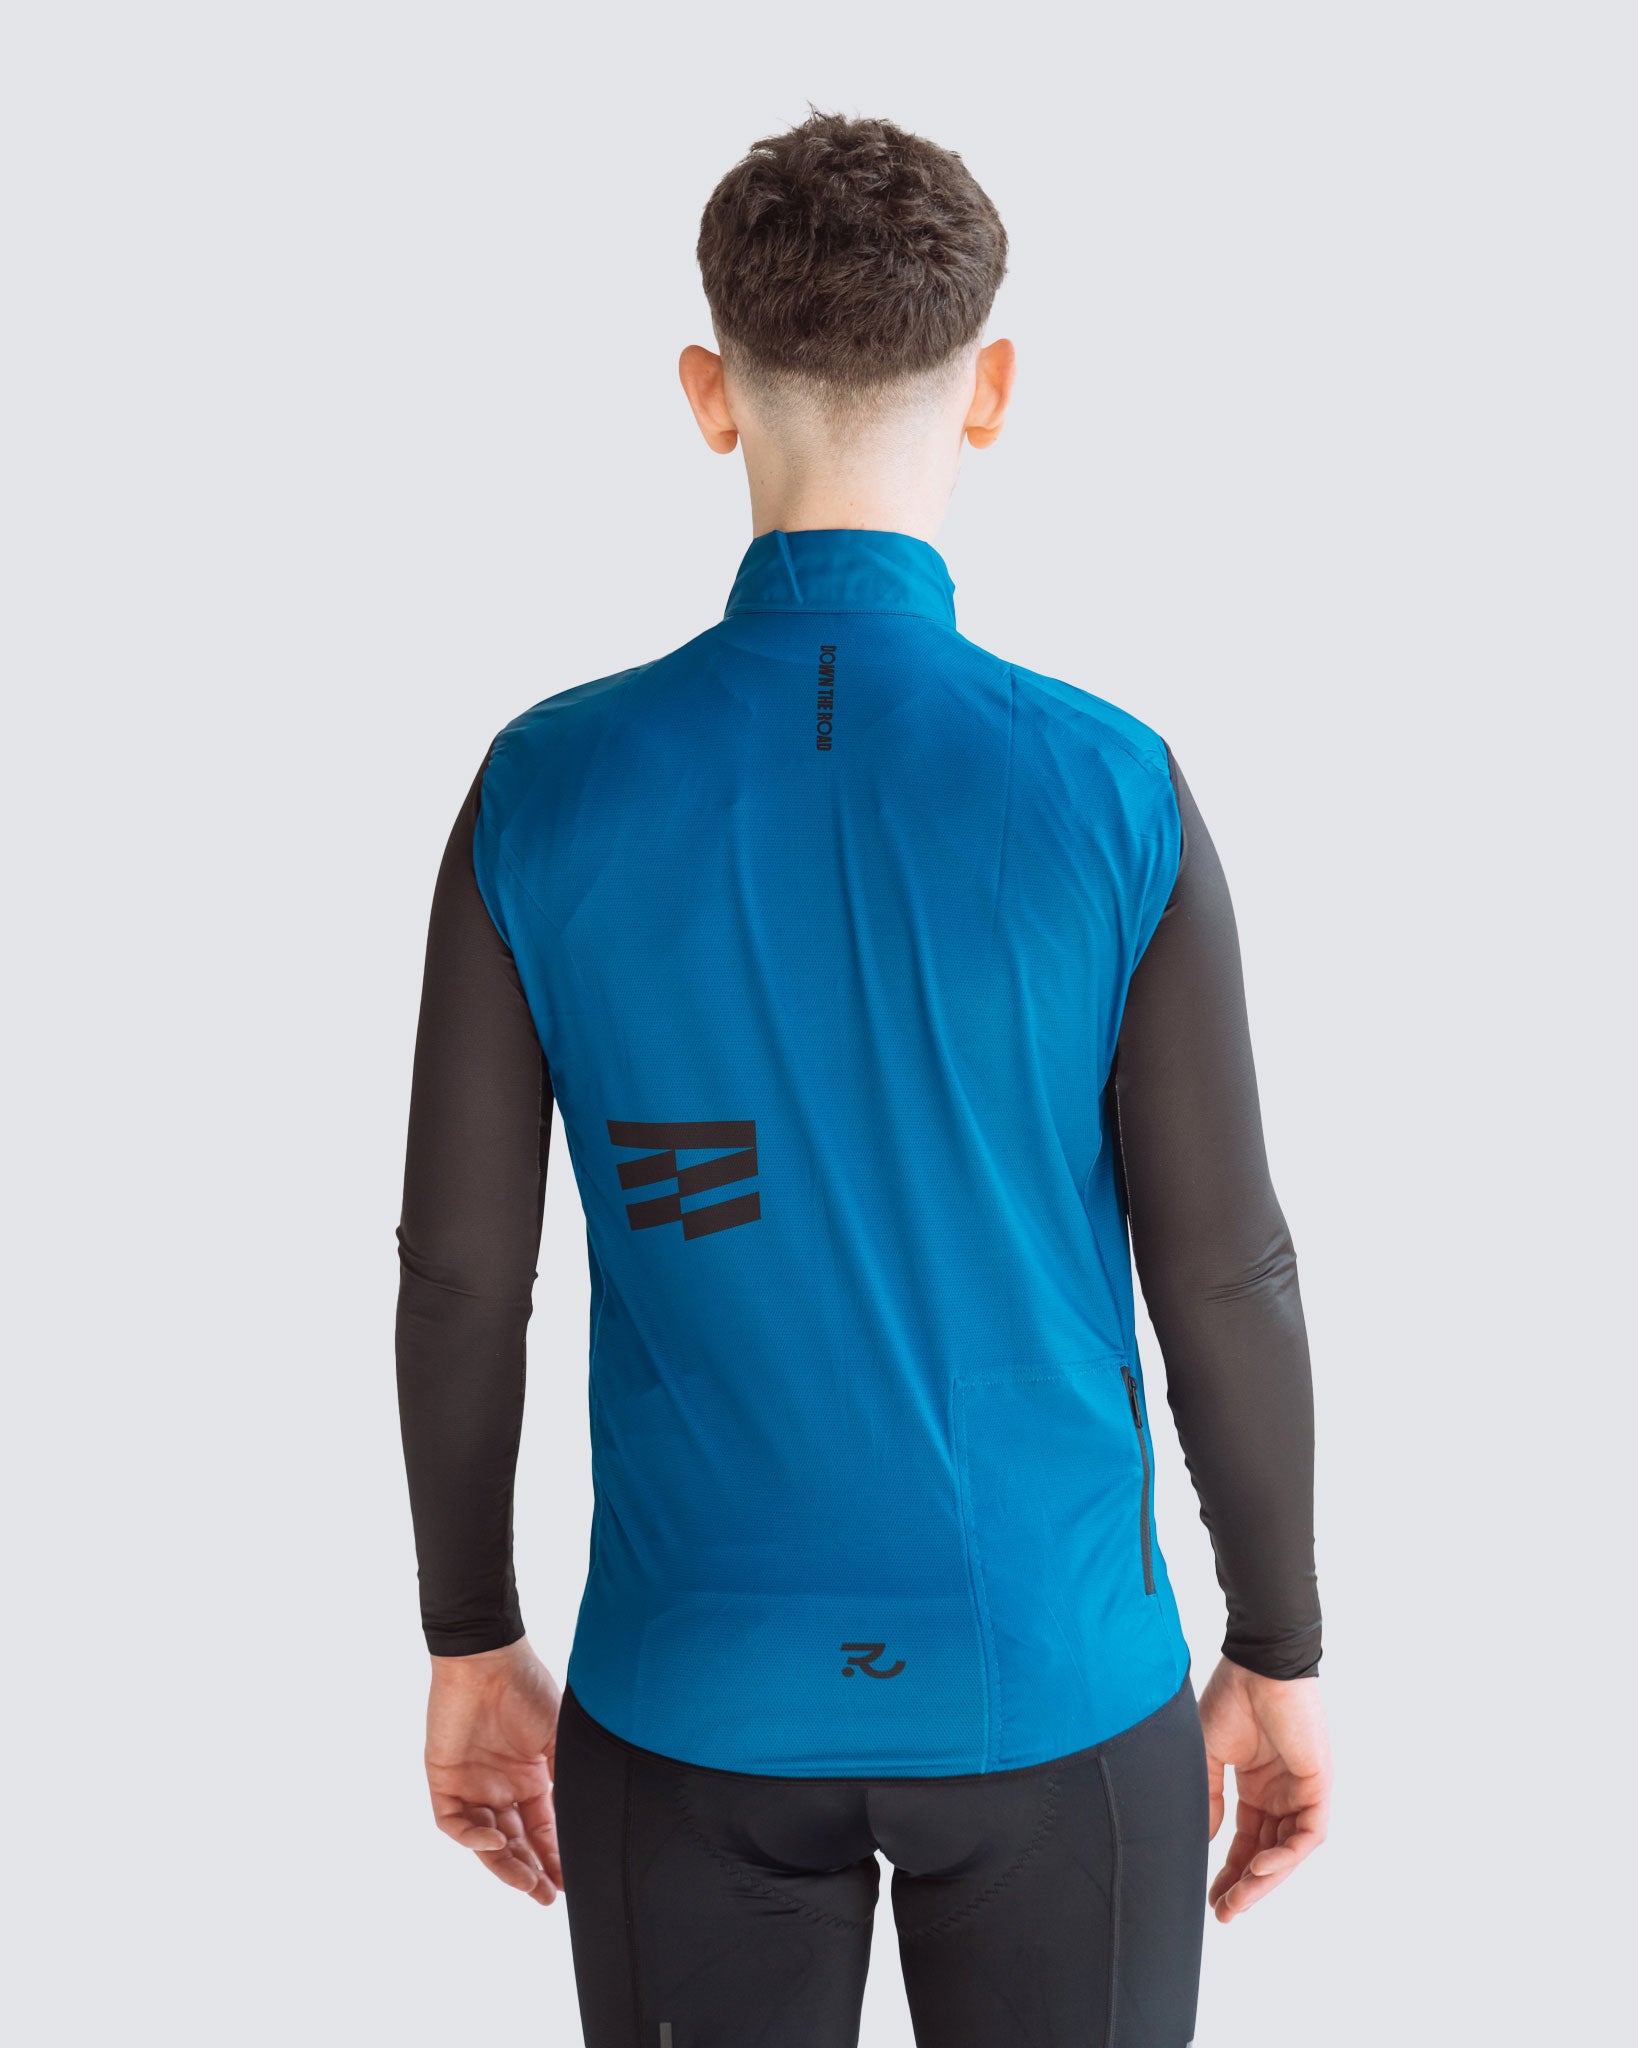 Wavy teal men cycling vest back view